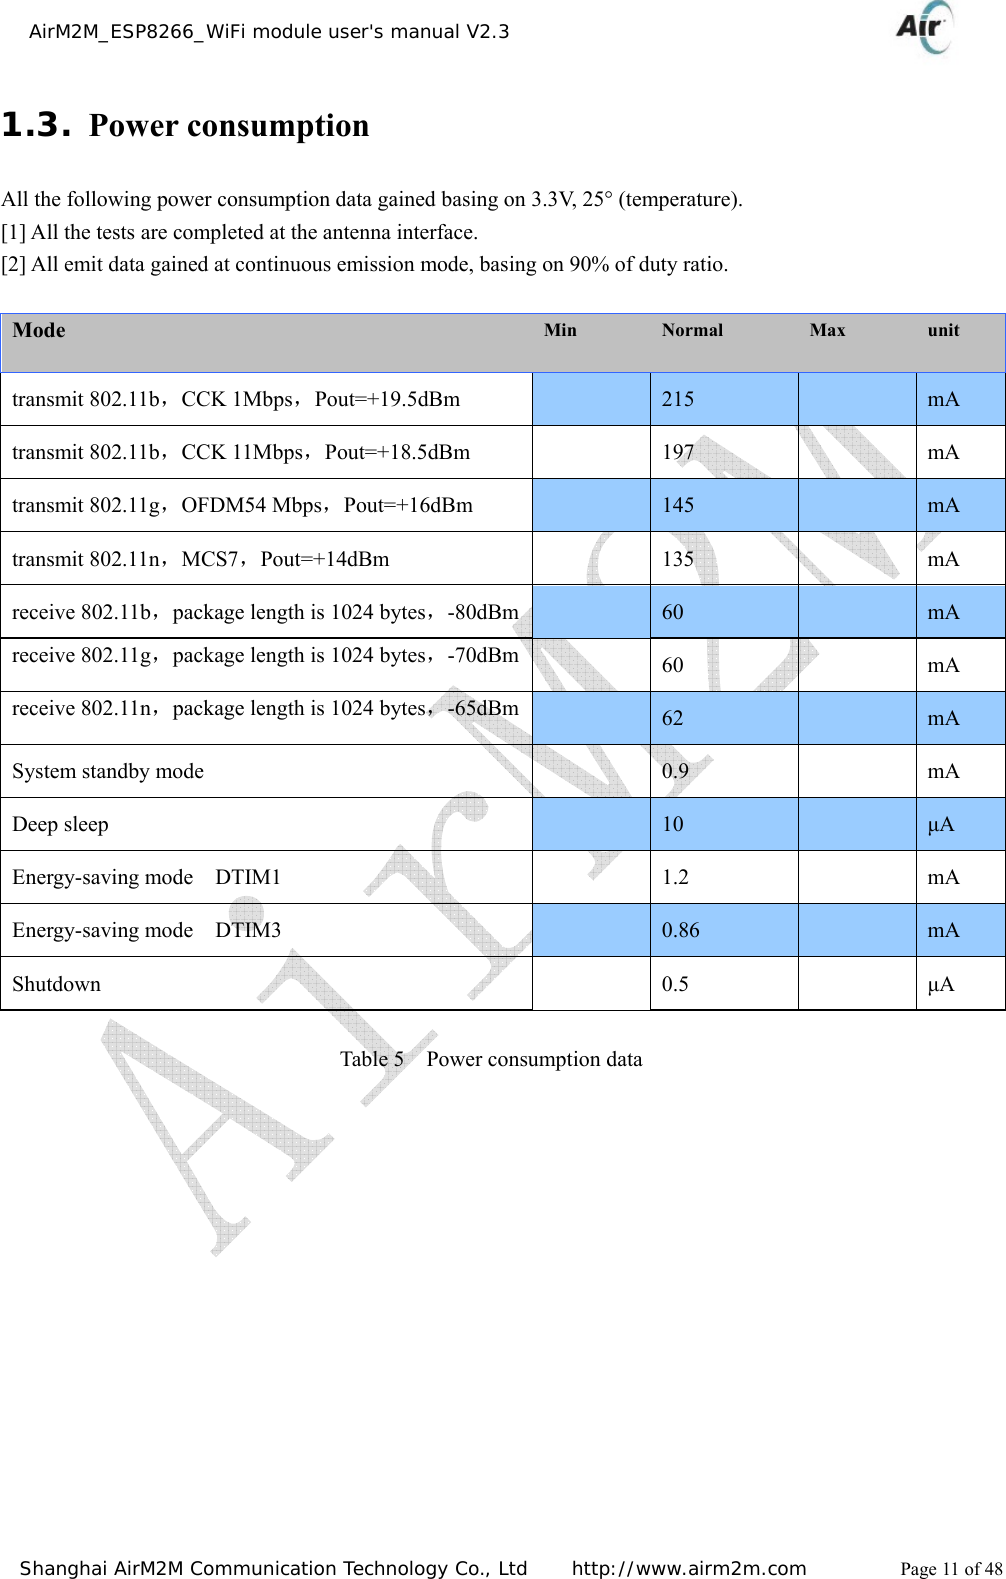    AirM2M_ESP8266_WiFi module user&apos;s manual V2.3   Shanghai AirM2M Communication Technology Co., Ltd     http://www.airm2m.com          Page 11 of 48 1.3. Power consumption All the following power consumption data gained basing on 3.3V, 25° (temperature). [1] All the tests are completed at the antenna interface. [2] All emit data gained at continuous emission mode, basing on 90% of duty ratio.  Mode  Min  Normal  Max  unit transmit 802.11b，CCK 1Mbps，Pout=+19.5dBm   215   mA transmit 802.11b，CCK 11Mbps，Pout=+18.5dBm  197  mA transmit 802.11g，OFDM54 Mbps，Pout=+16dBm   145   mA transmit 802.11n，MCS7，Pout=+14dBm   135  mA receive 802.11b，package length is 1024 bytes，-80dBm  60   mA receive 802.11g，package length is 1024 bytes，-70dBm  60   mA receive 802.11n，package length is 1024 bytes，-65dBm  62   mA System standby mode   0.9  mA Deep sleep   10   μA Energy-saving mode  DTIM1    1.2    mA Energy-saving mode  DTIM3   0.86   mA Shutdown  0.5  μA                                      Table 5  Power consumption data               